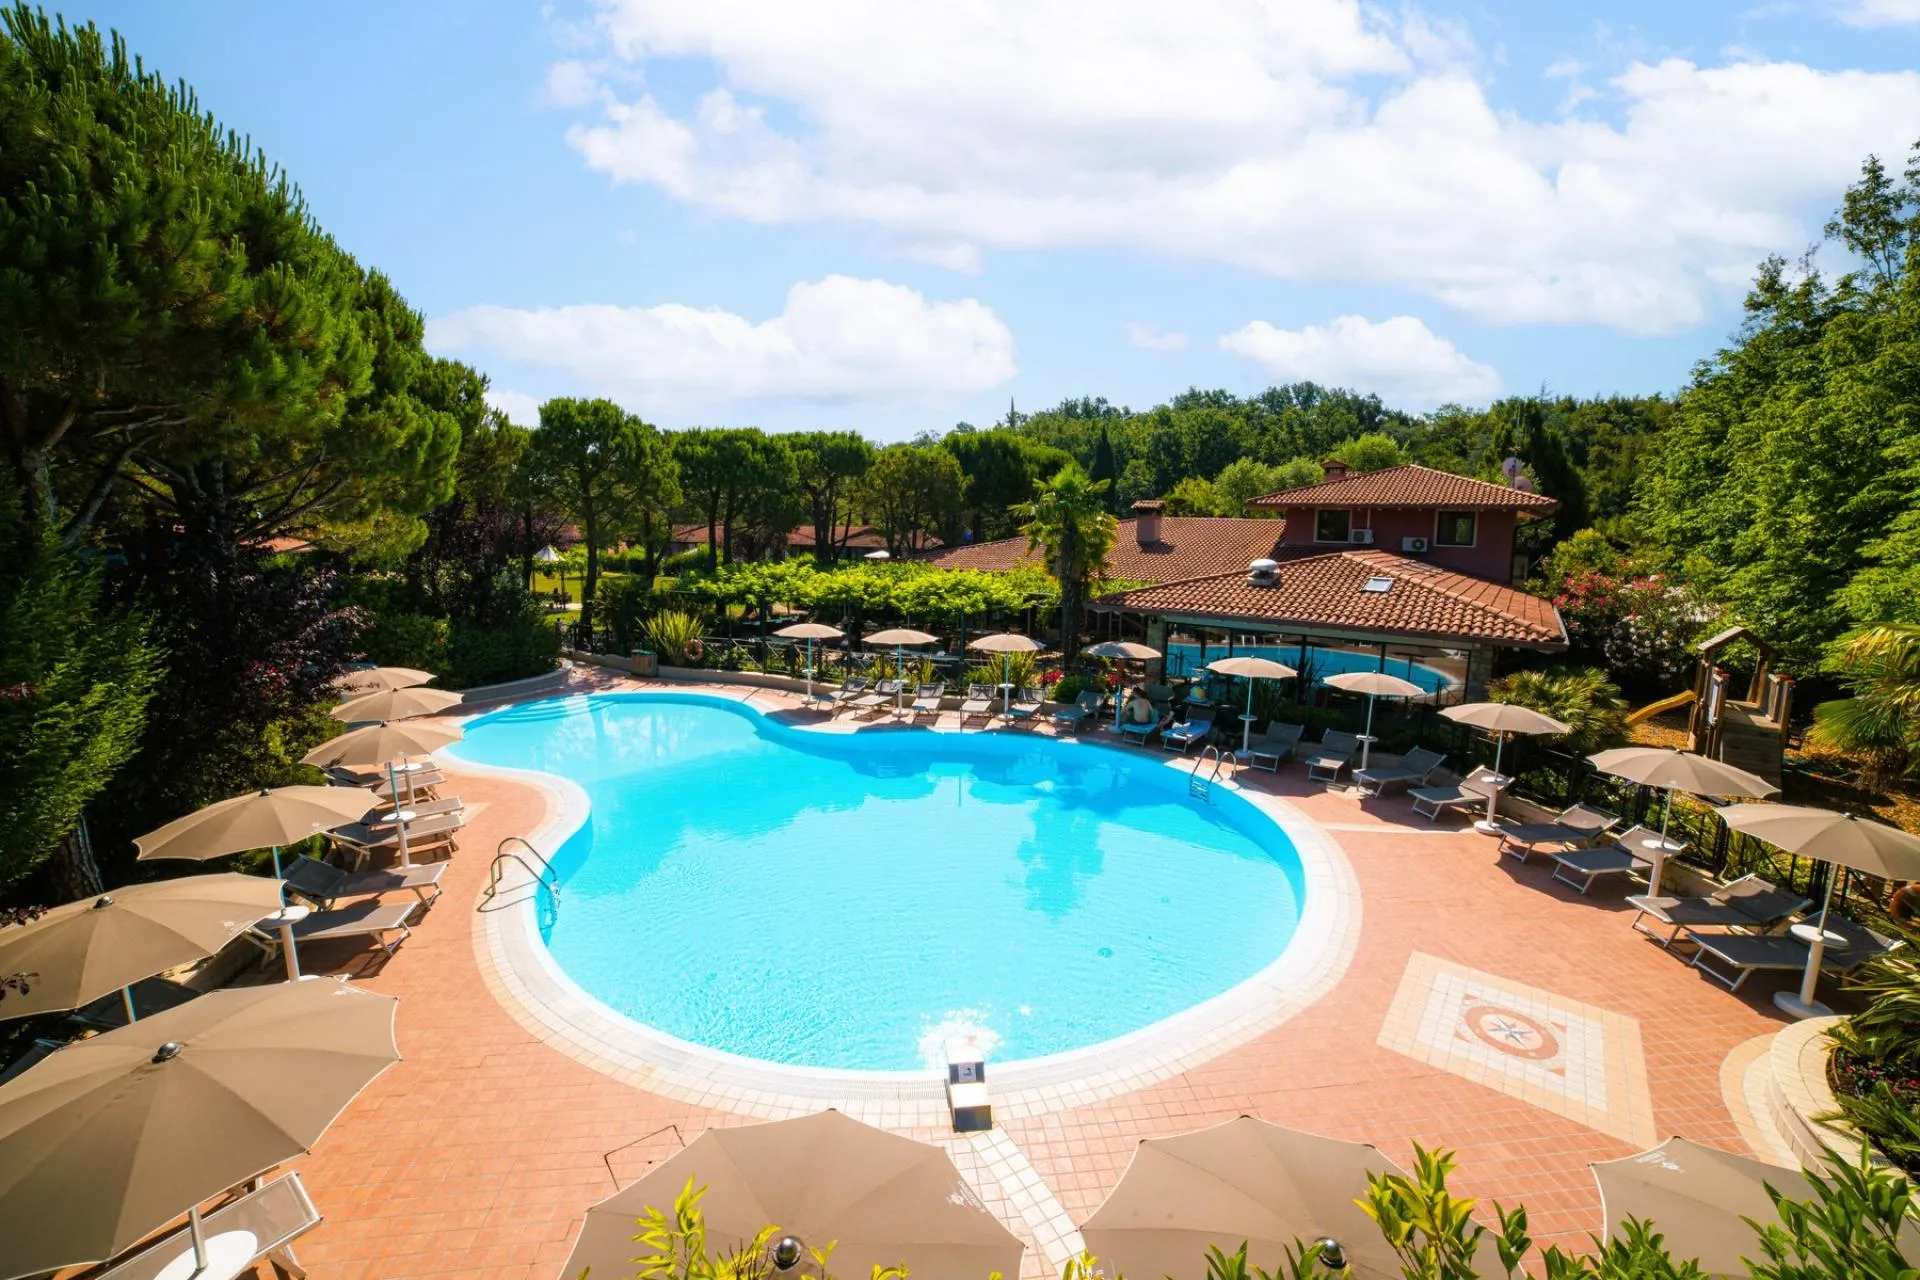 Discover our pools